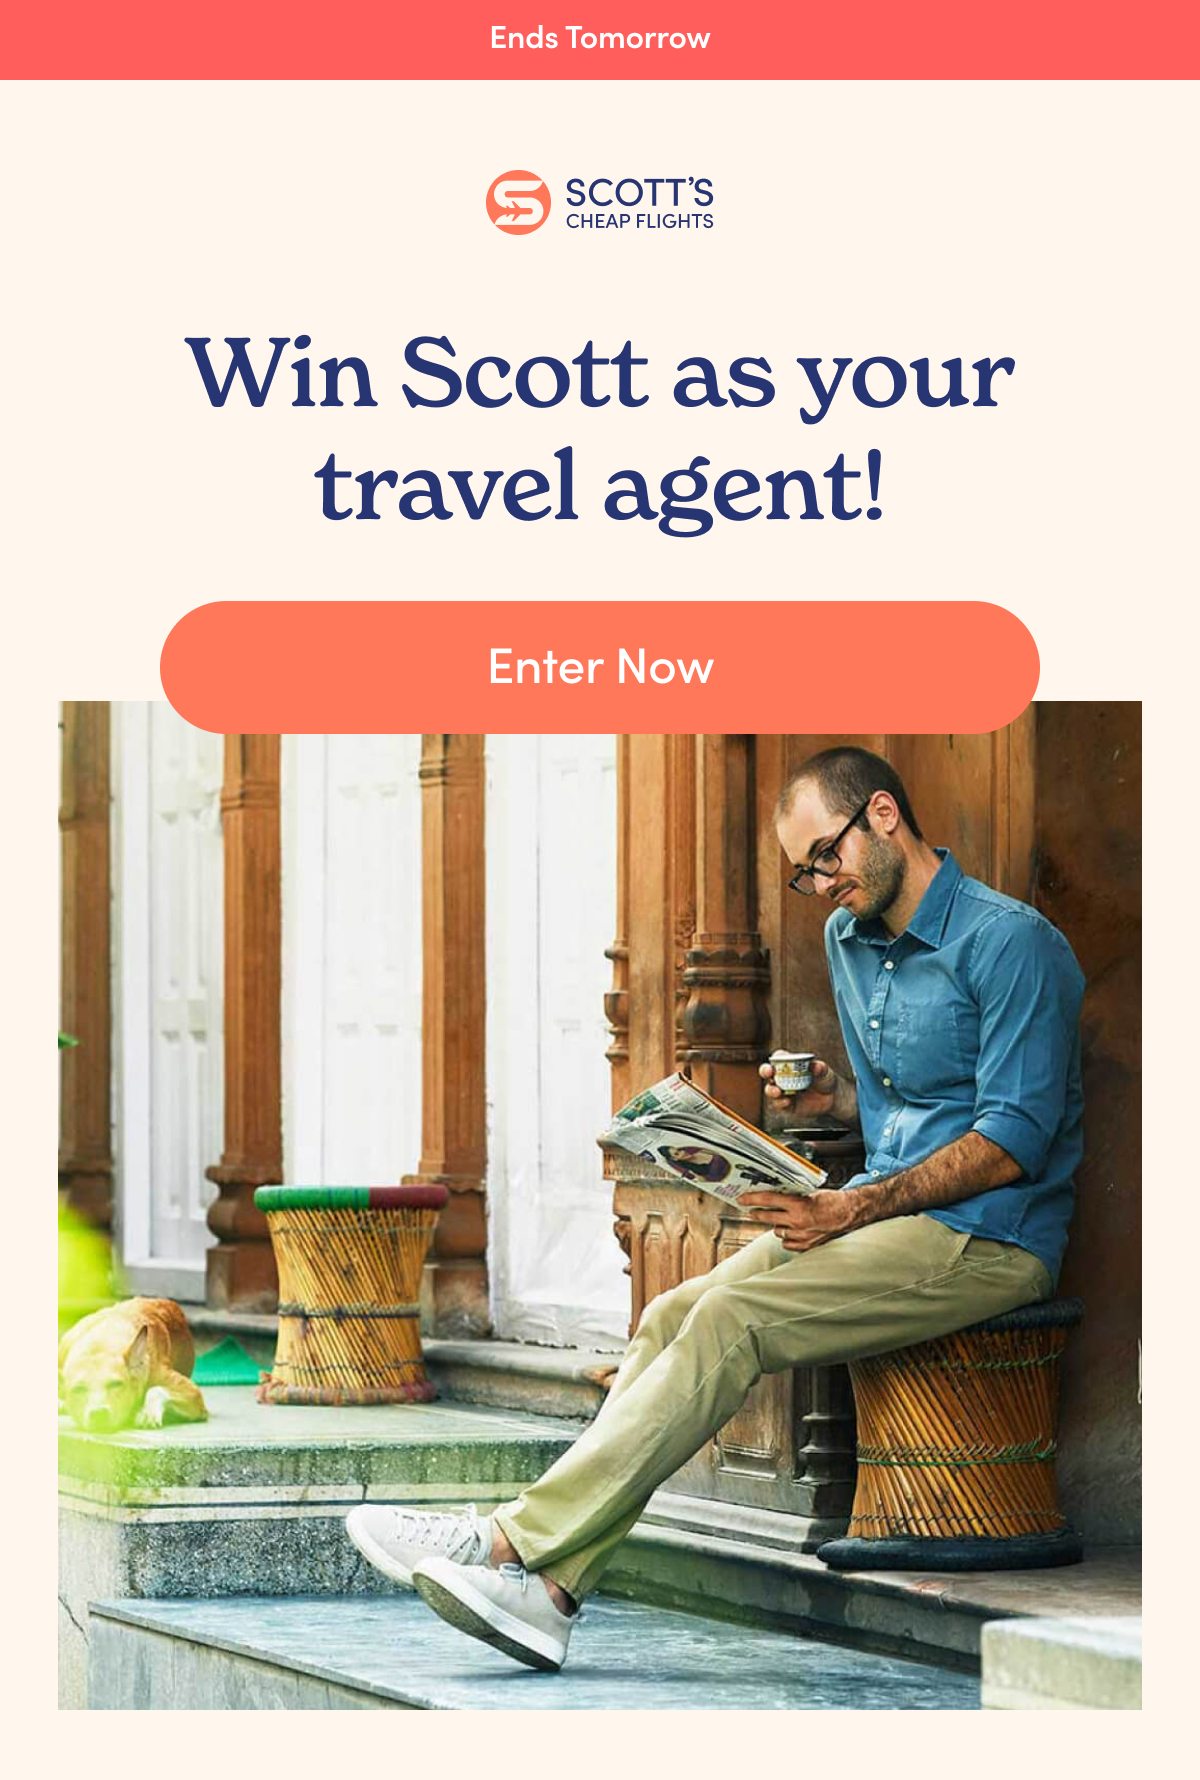 Win Scott as your travel agent